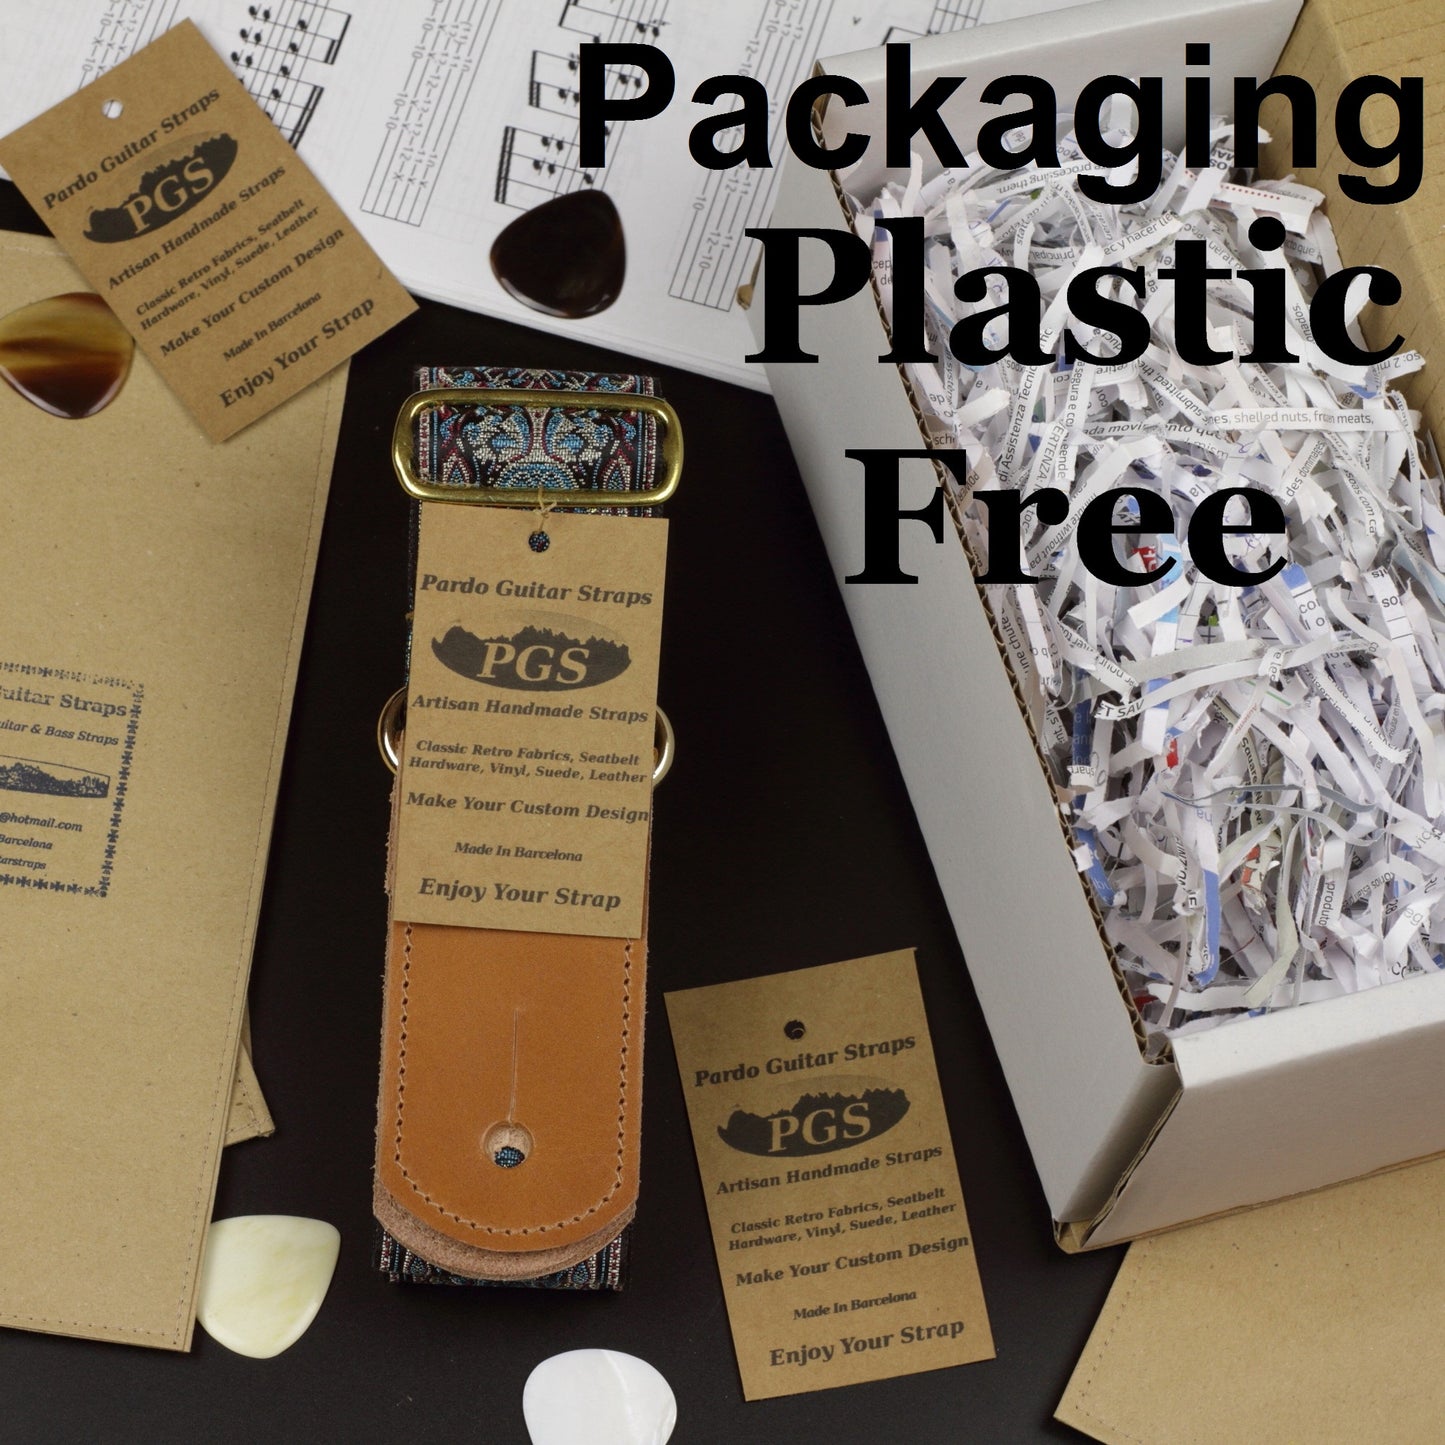 The strap is Packaged inside a small carton box, all the packaging is free of plastic.